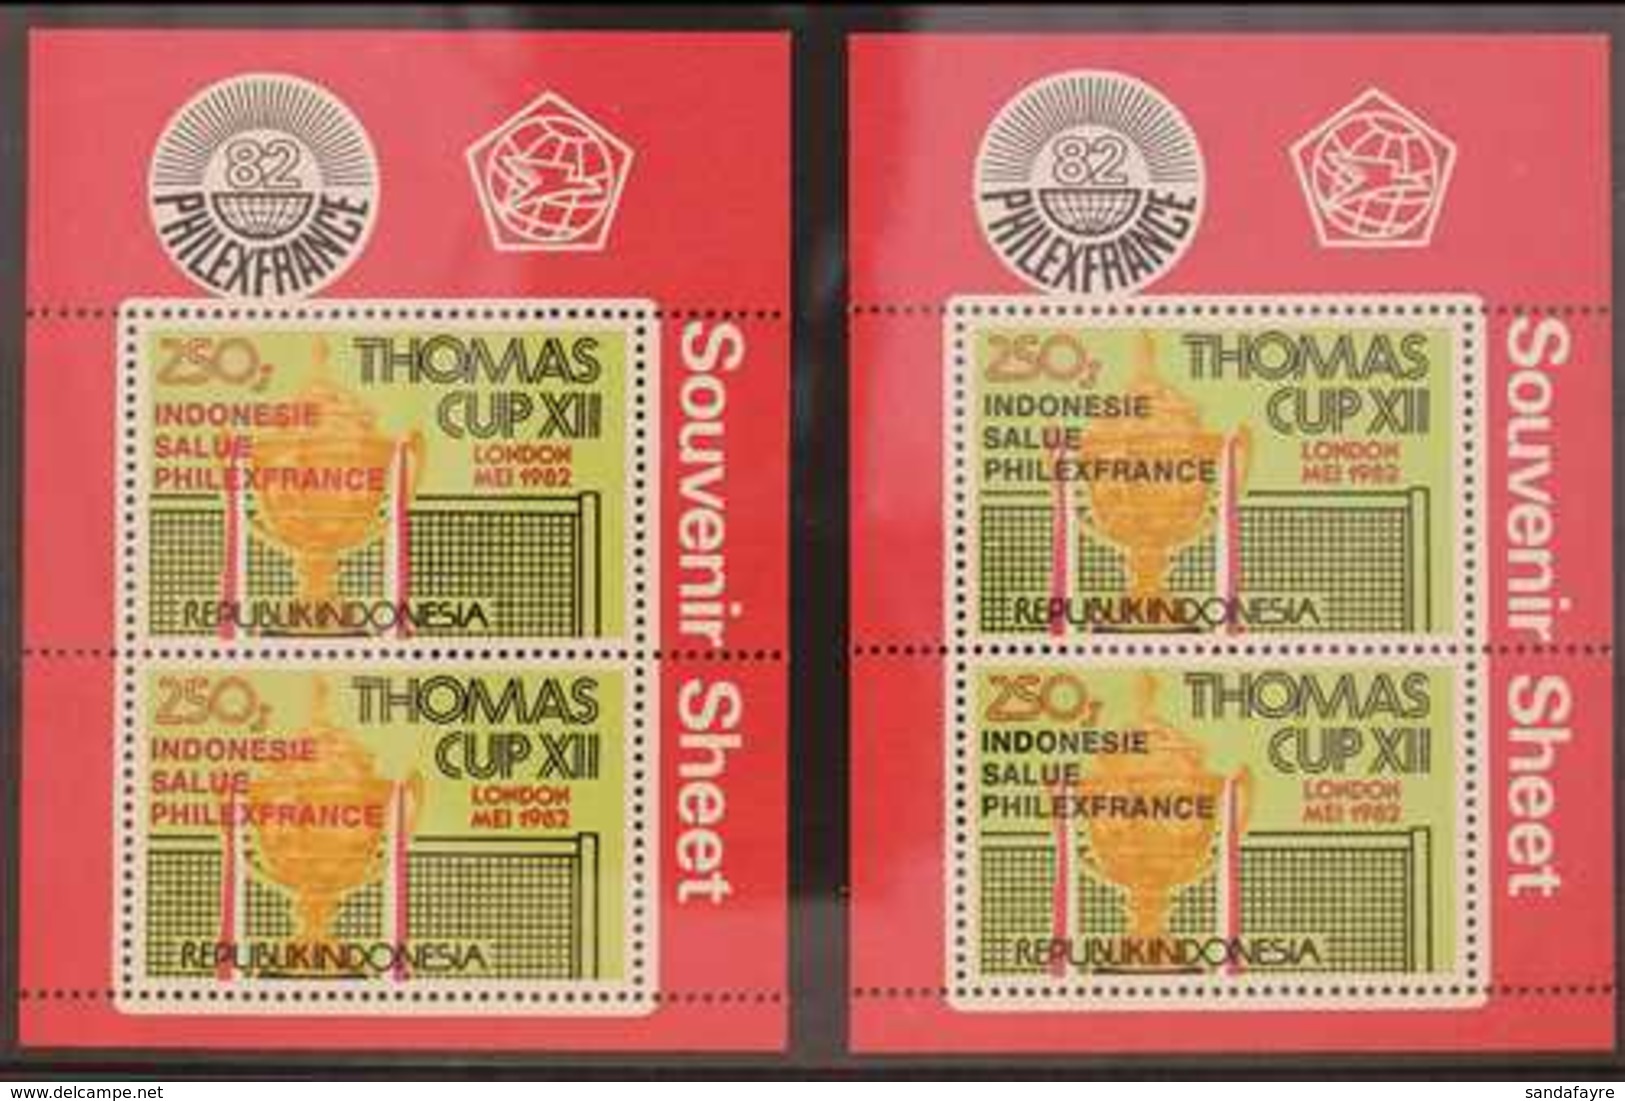 1982 "INDONESIE SALUE PHILEXFRANCE" Overprints In Both Red And In Black On Badminton Cup Miniature Sheets, Michel Blocks - Indonesië